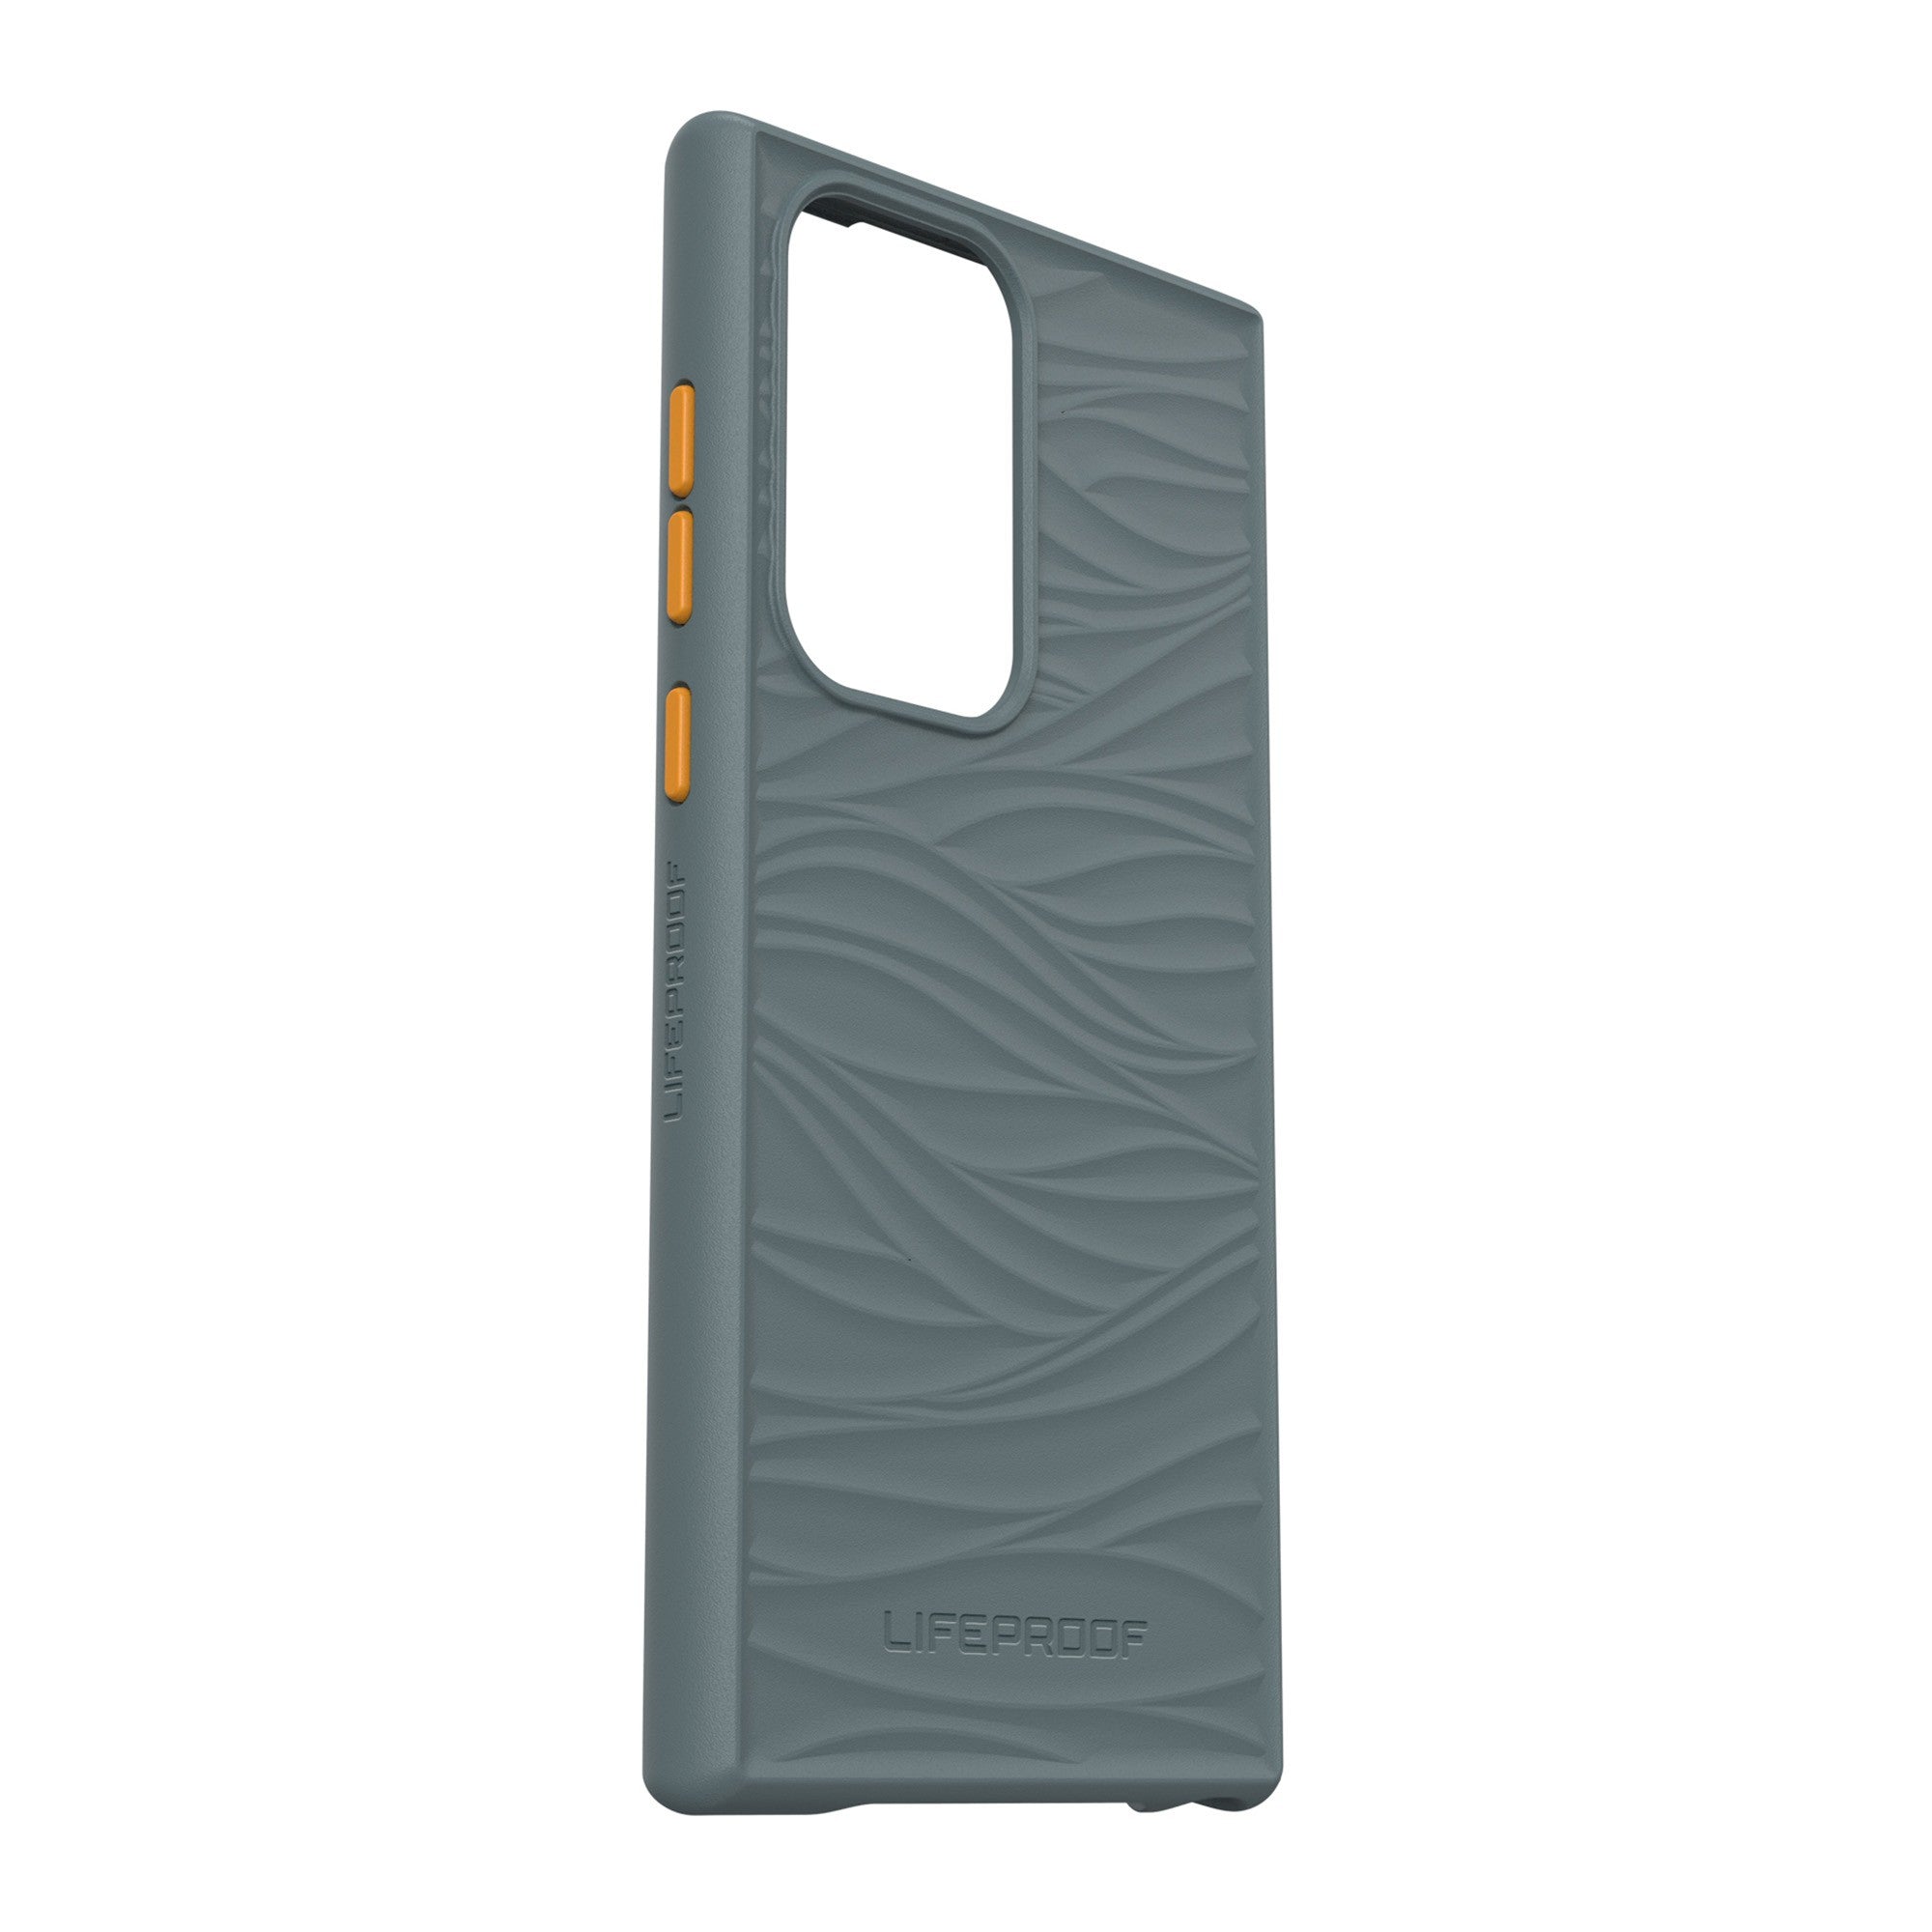 Samsung Galaxy S22 5G LifeProof Wake Recycled Plastic Case - Grey (Anchors Away) - 15-09554